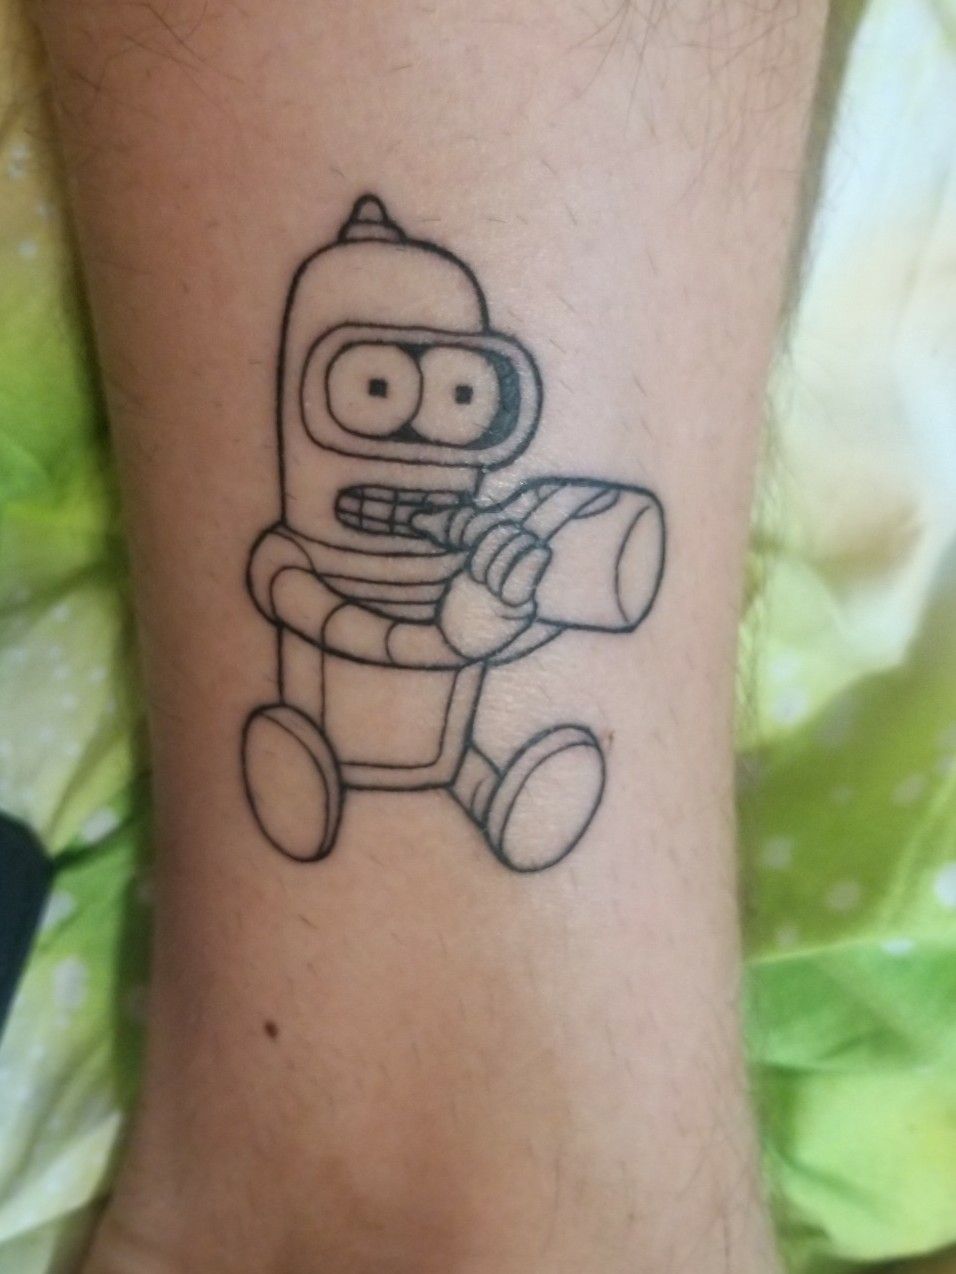 10 Best Bender Tattoo Ideas Youll Have To See To Believe   Daily Hind  News